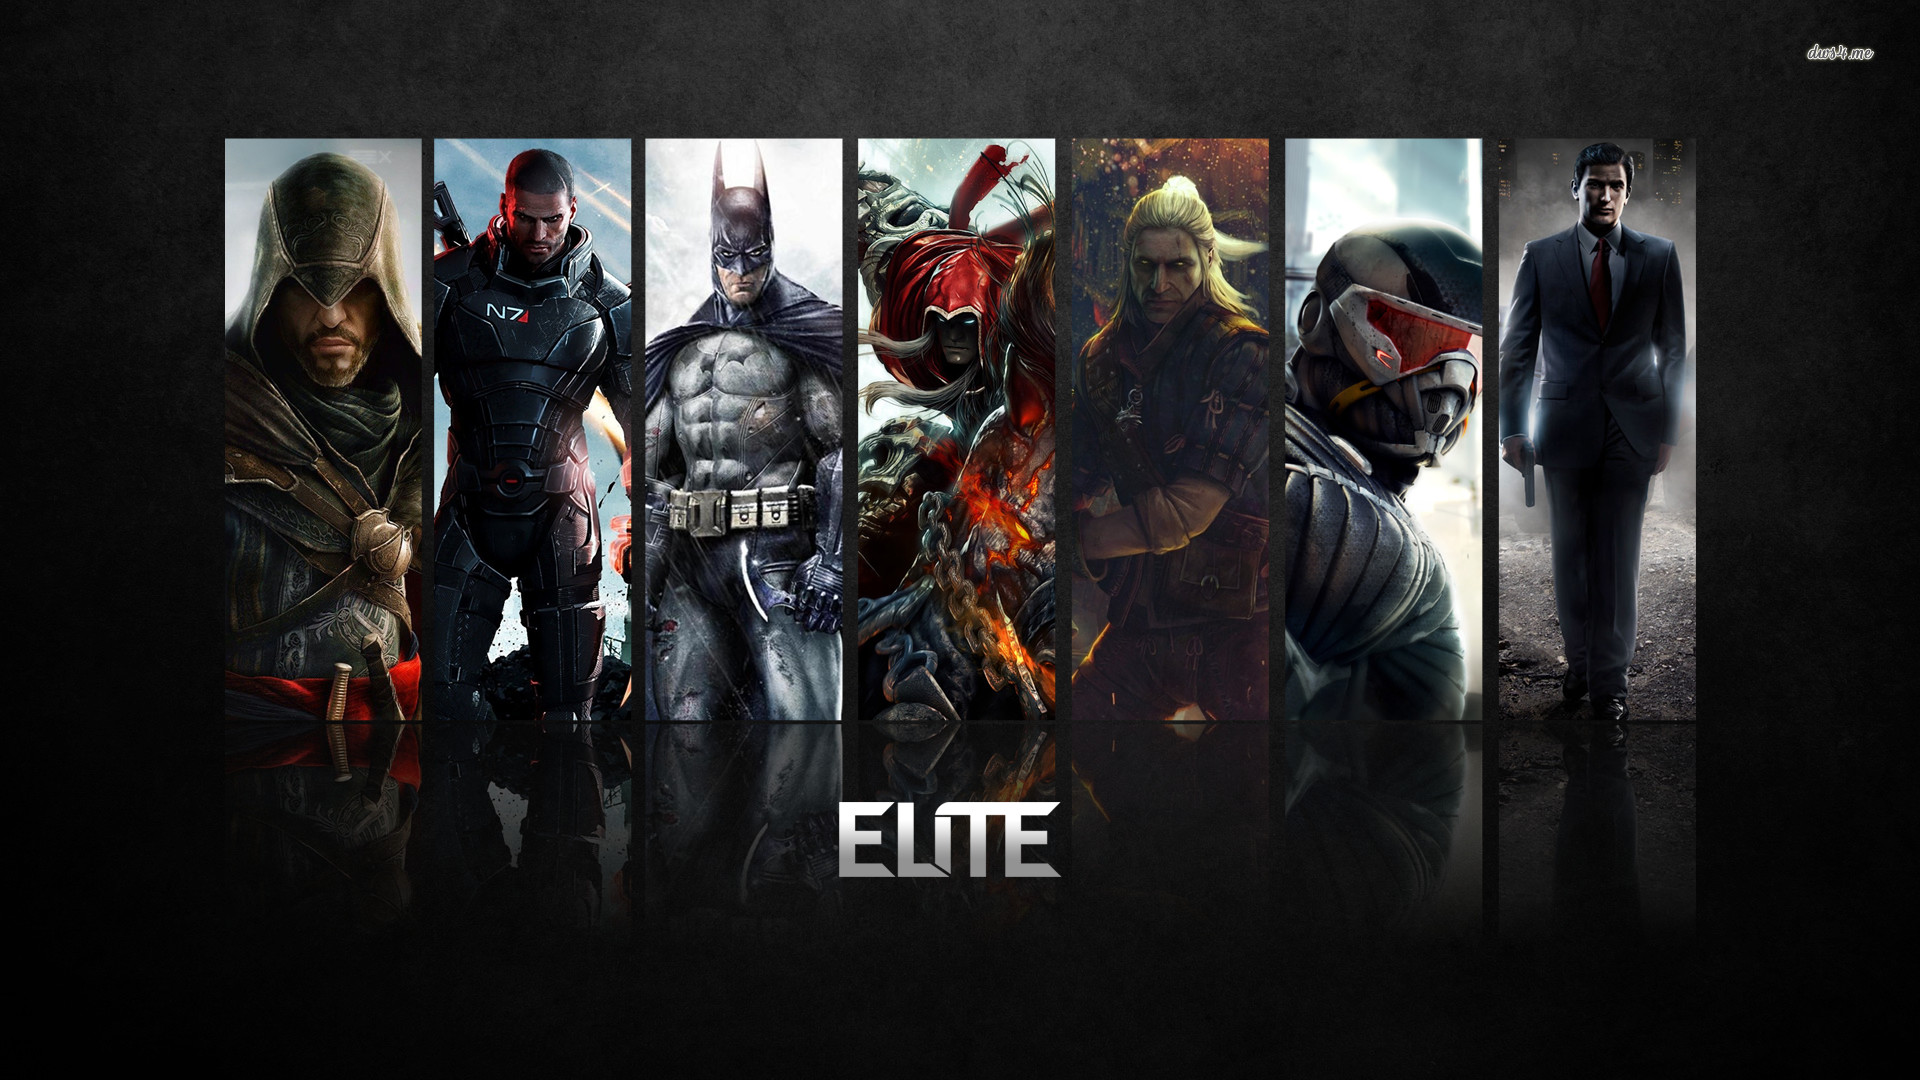 1920x1080 Elite video game characters wallpaper - Game wallpapers - #48790